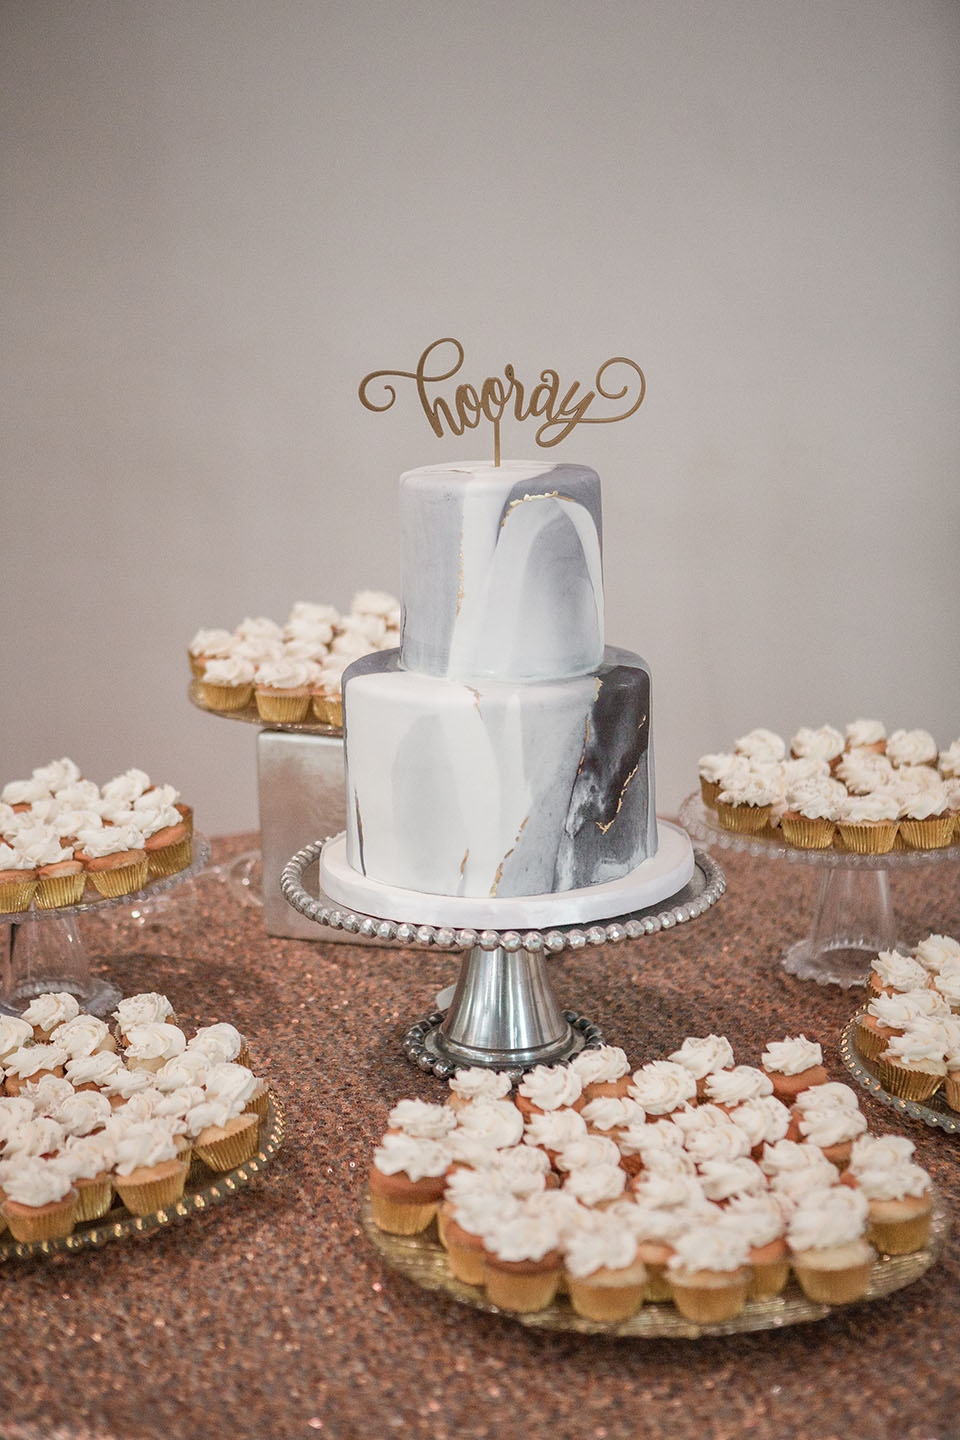 Marbled Wedding Cake and Cupcakes on Dessert Table